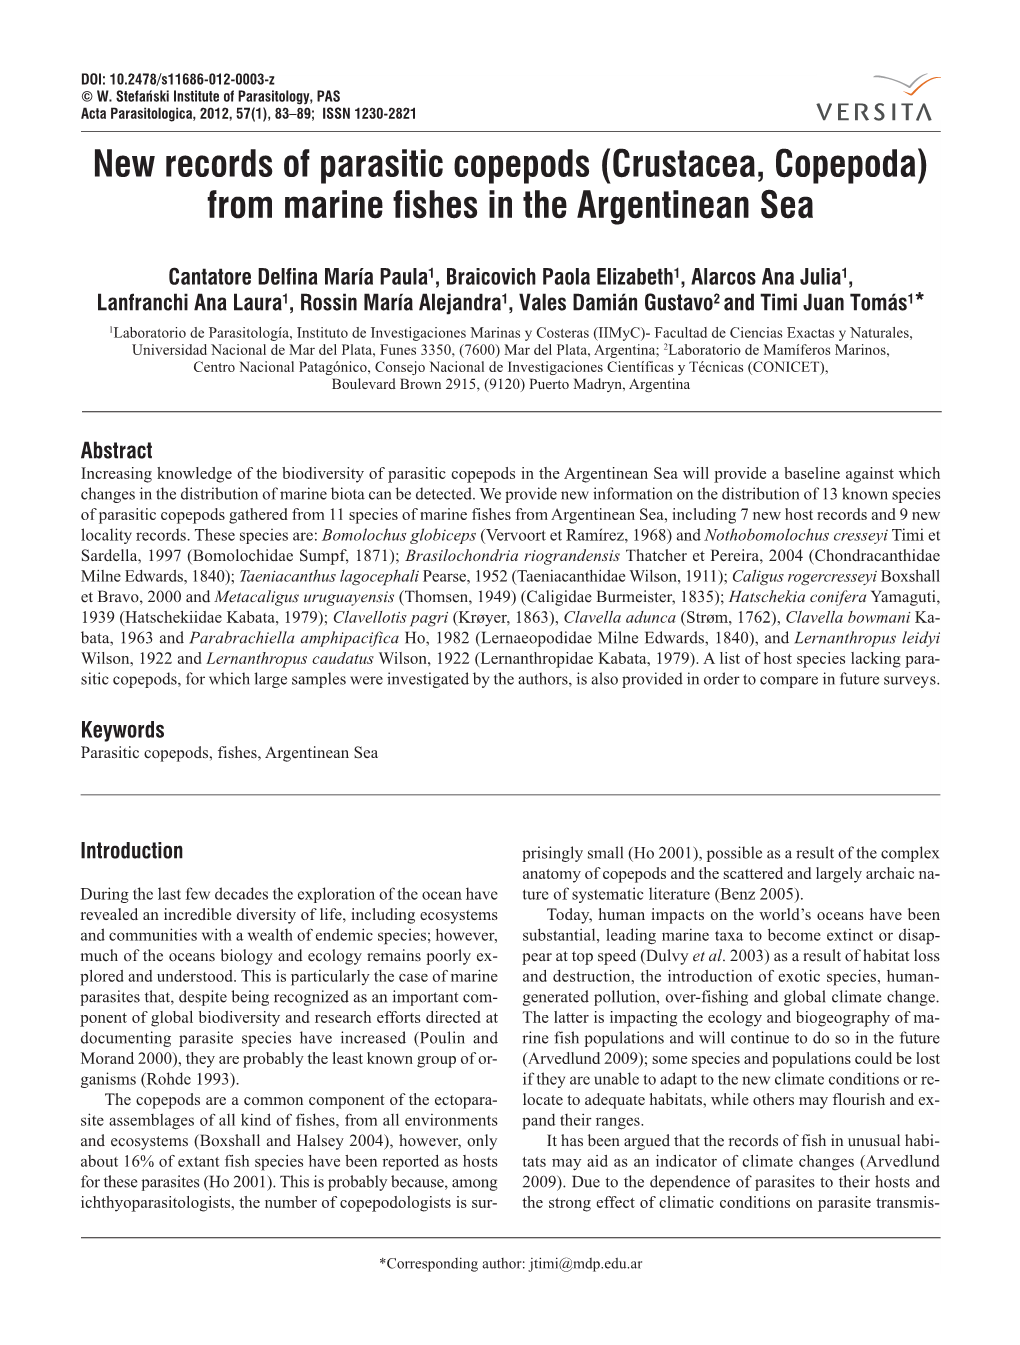 New Records of Parasitic Copepods (Crustacea, Copepoda) from Marine Fishes in the Argentinean Sea